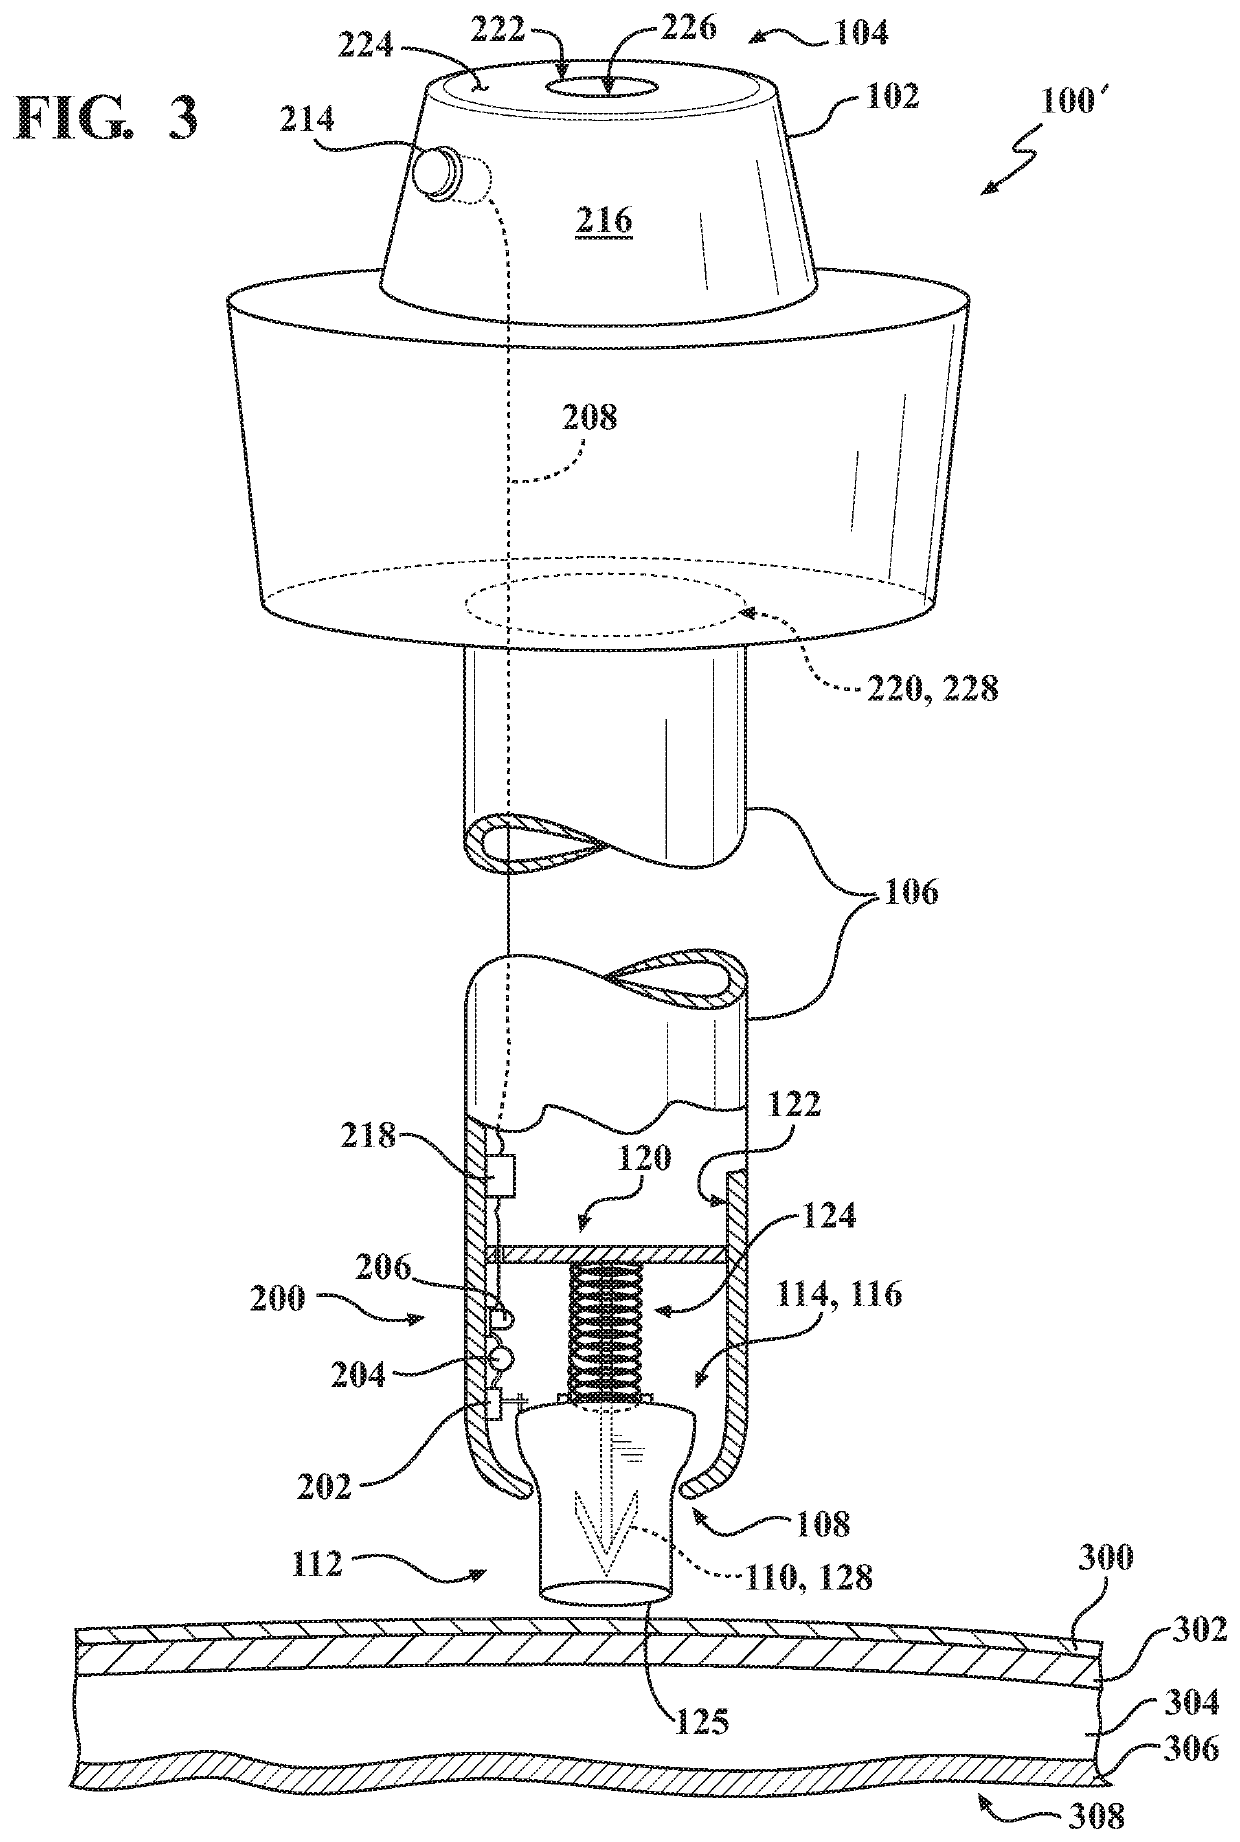 Trocar assemblies with movable atraumatic tip and methods for use